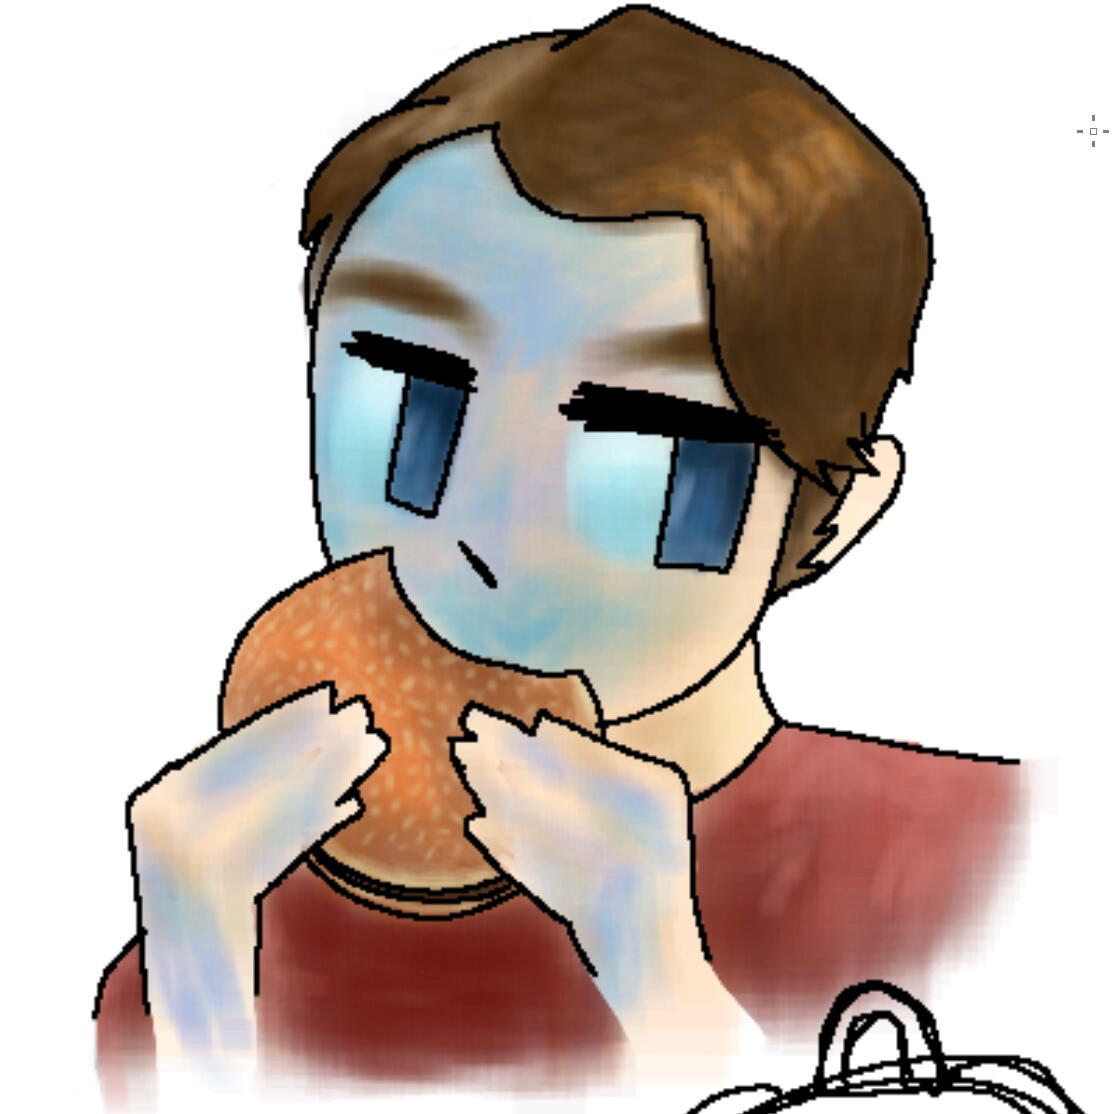 jerma eating a zurger in front of you